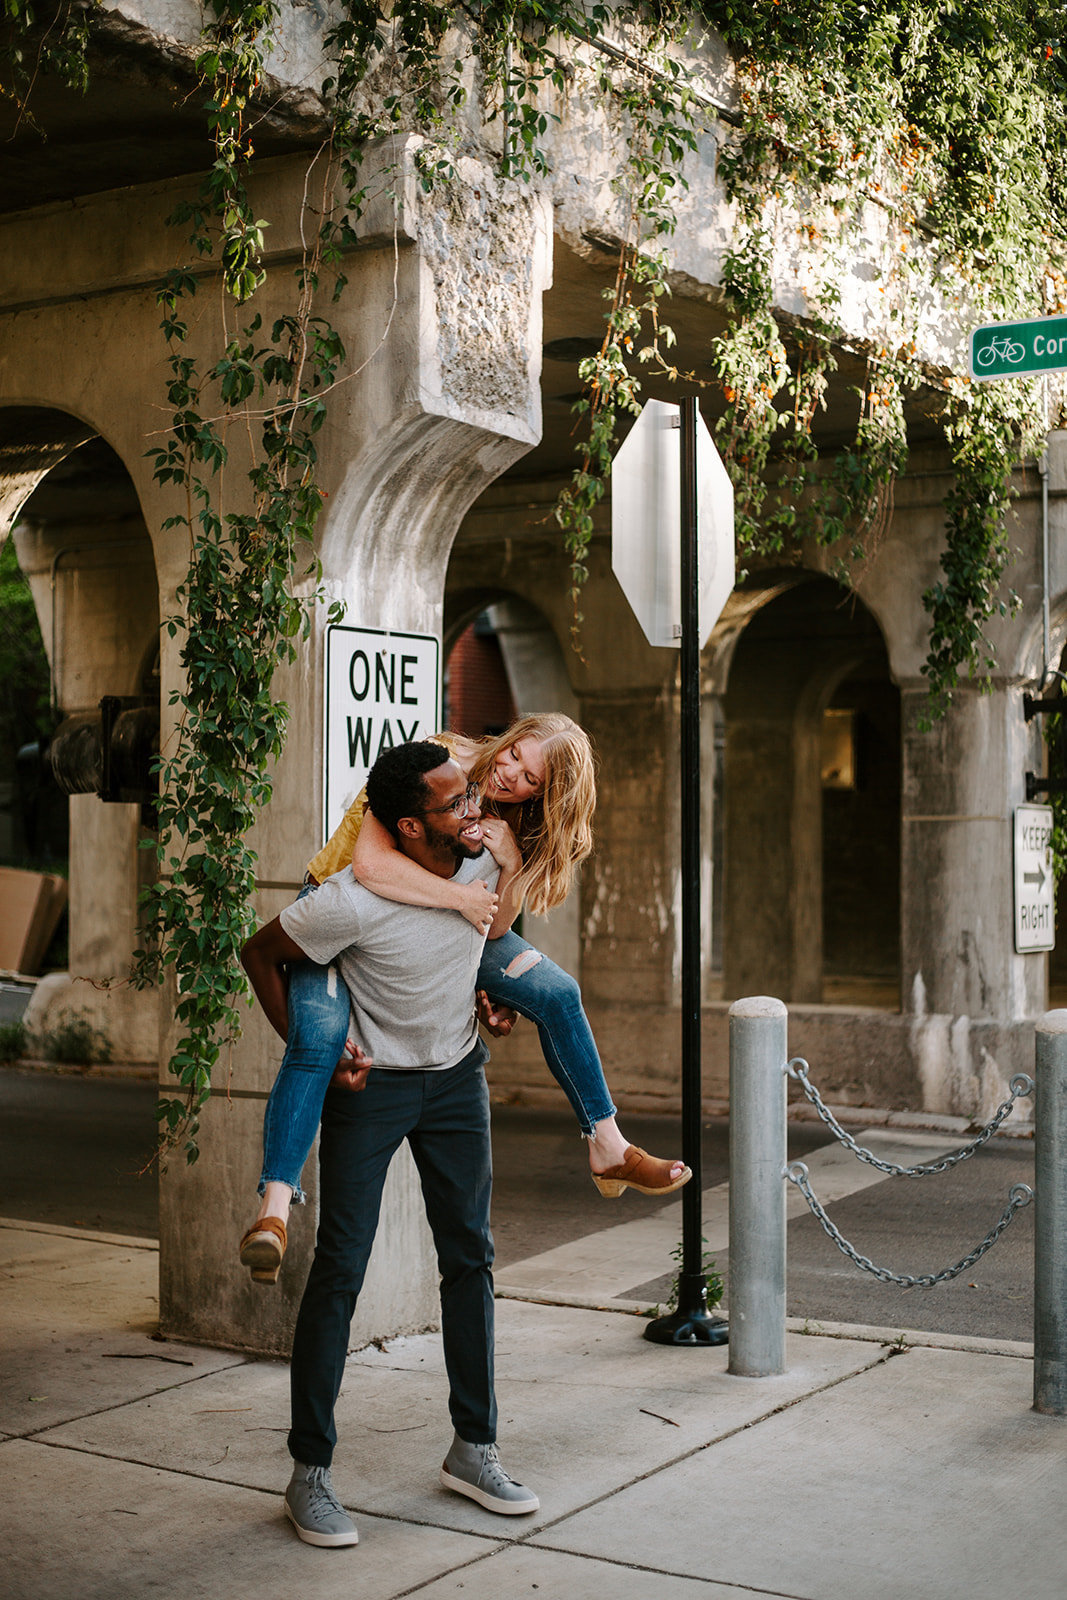 Couple doing a piggy back ride during the streets of Chicago during their engagement session